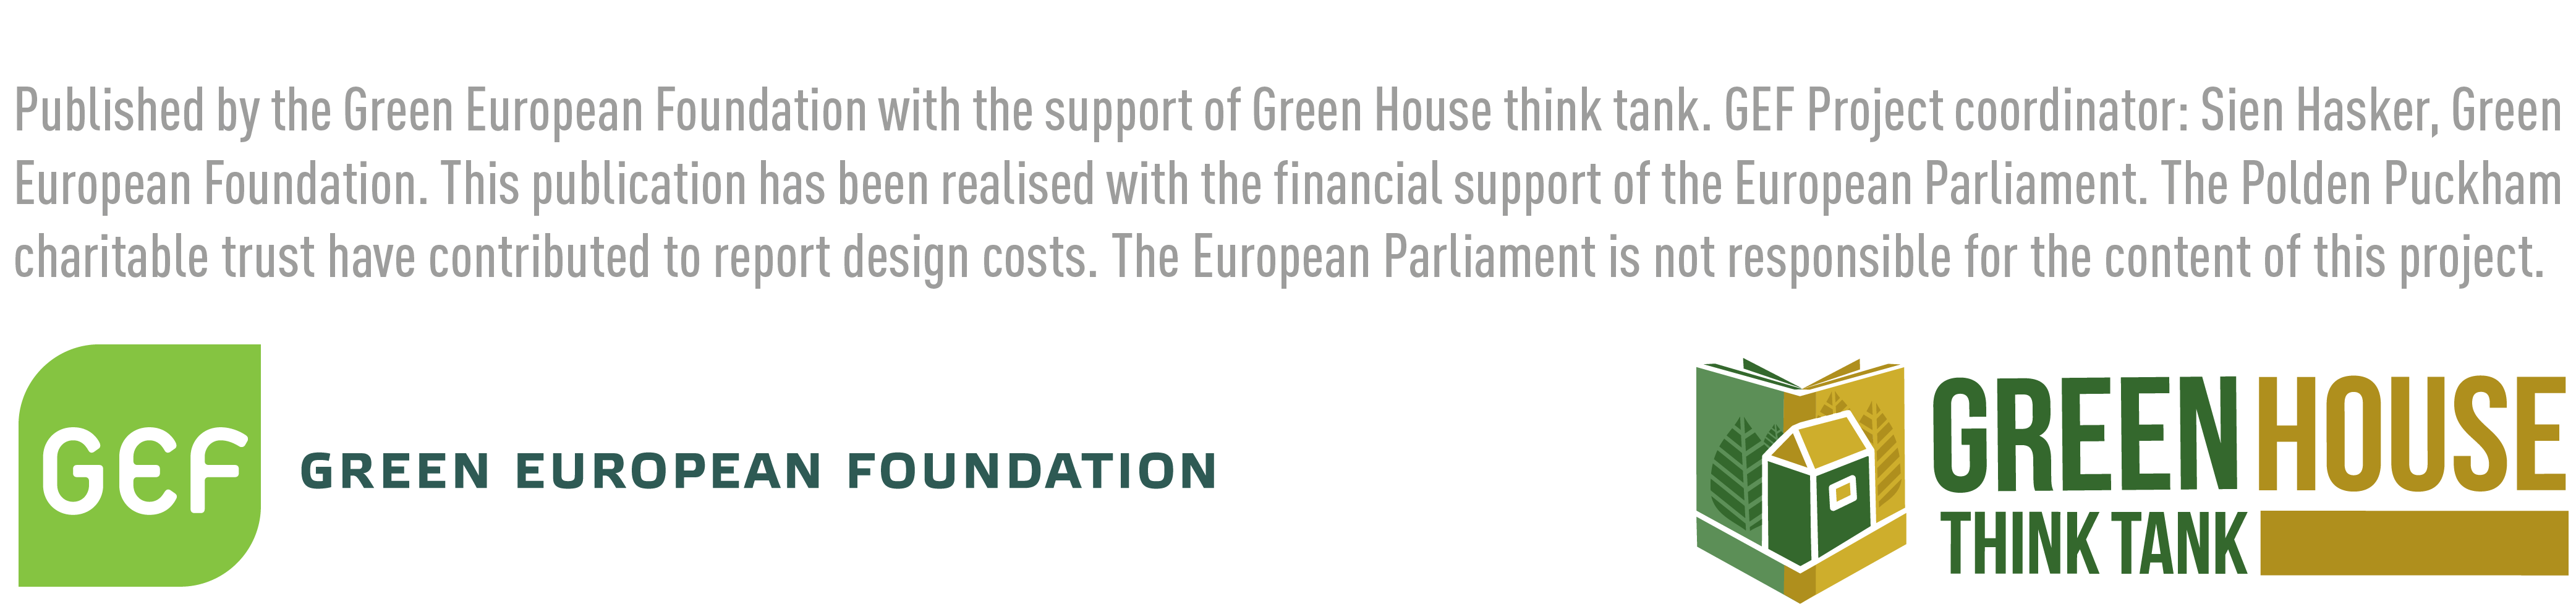 Image of the logos of theGreen European Foundation and Green House Think Tank with text that reads Published by the Green European Foundation with the support of Green House think tank. GEF project coordinator: Sian Hasker, Green European Foundation. This publication has been realised with financial support of the European parliament. The Polden Puckham charitable trust have contributed to the report design costs. The European Parliament is not responsible for the content of this project.